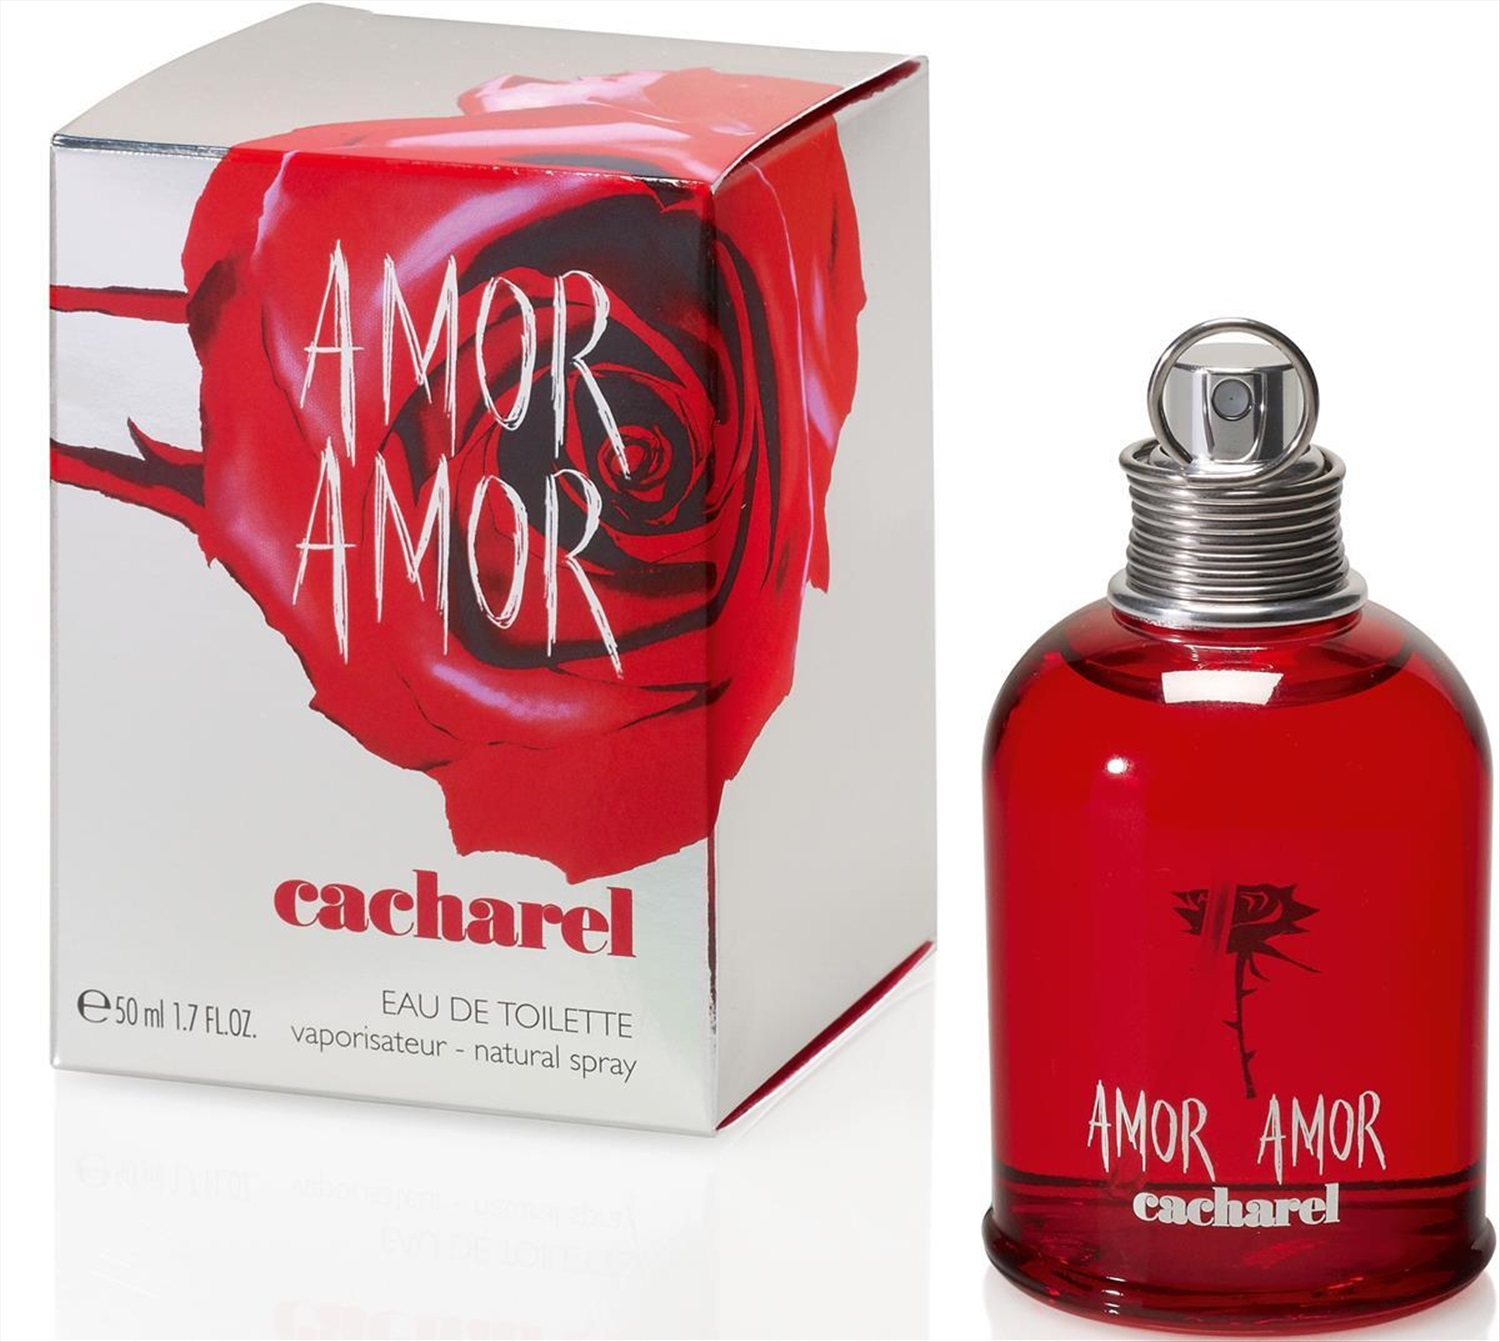 Terra amore. Amore Amore духи Cacharel. Cacharel Amor Amor 50ml EDT. Флакон Cacharel Amor Amor w EDT 4 ml. Cacharel Amor Amor EDT 50ml w.